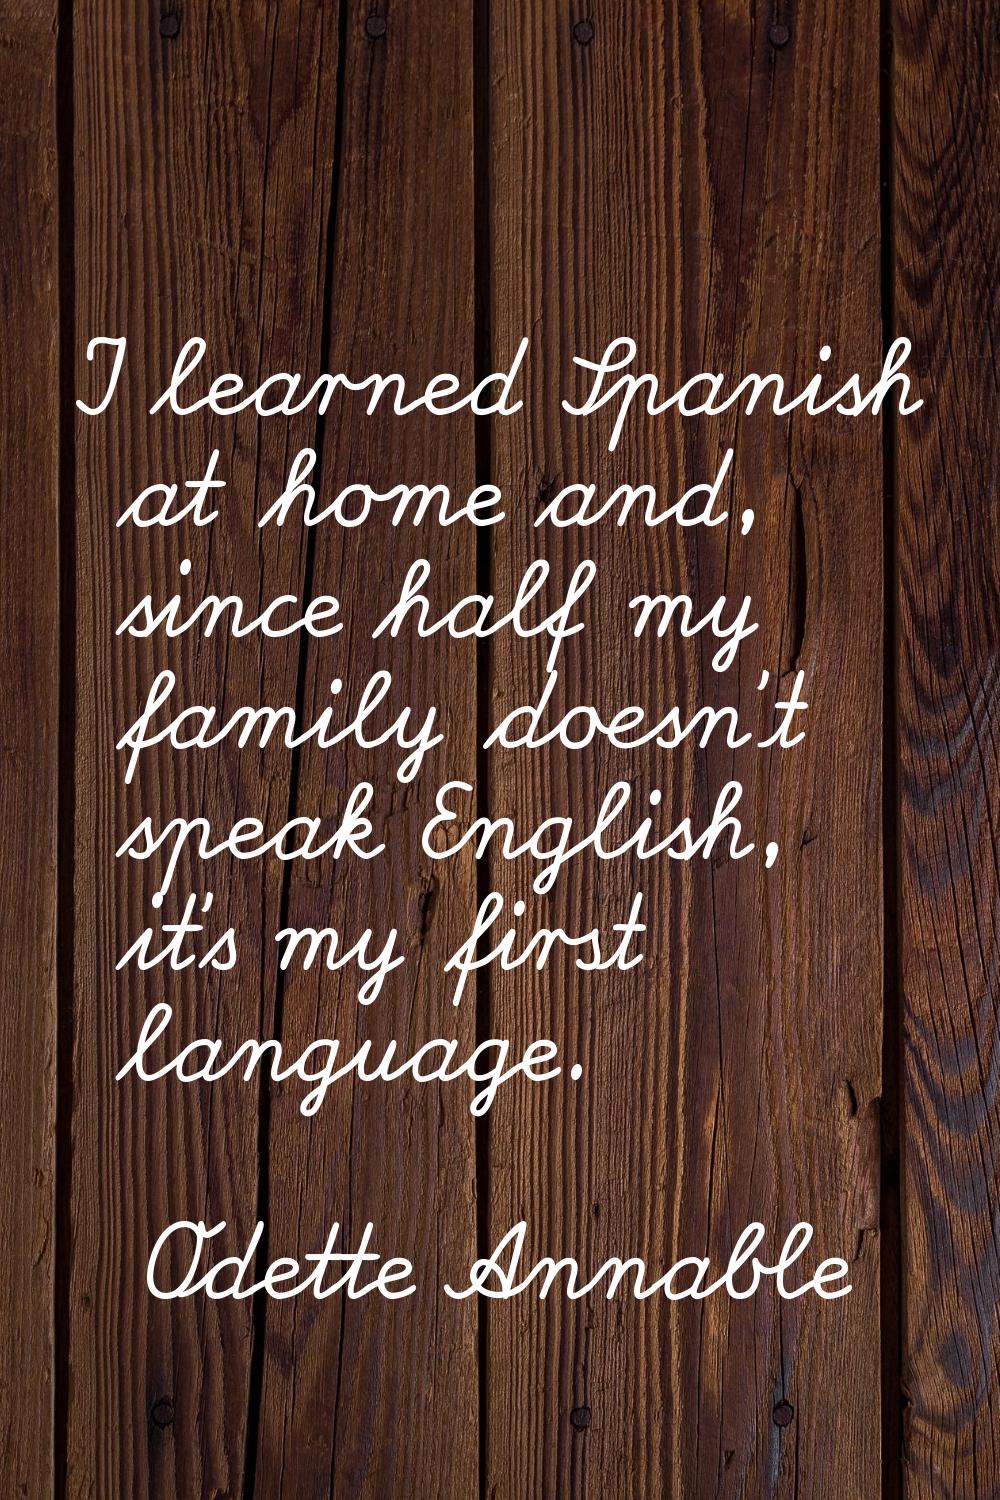 I learned Spanish at home and, since half my family doesn't speak English, it's my first language.